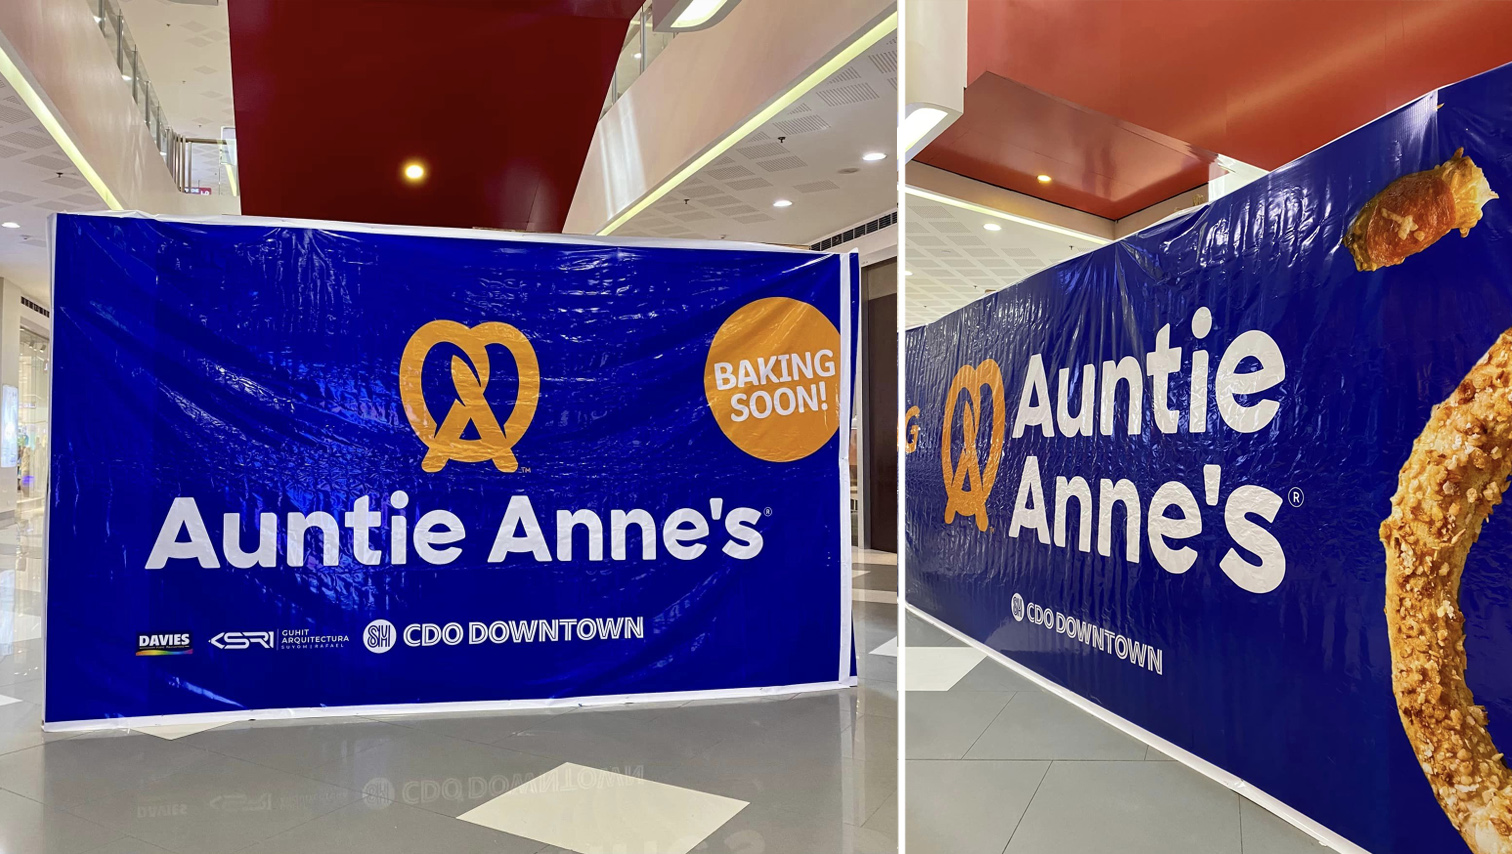 Auntie Anne’s baking soon at SM CDO Downtown